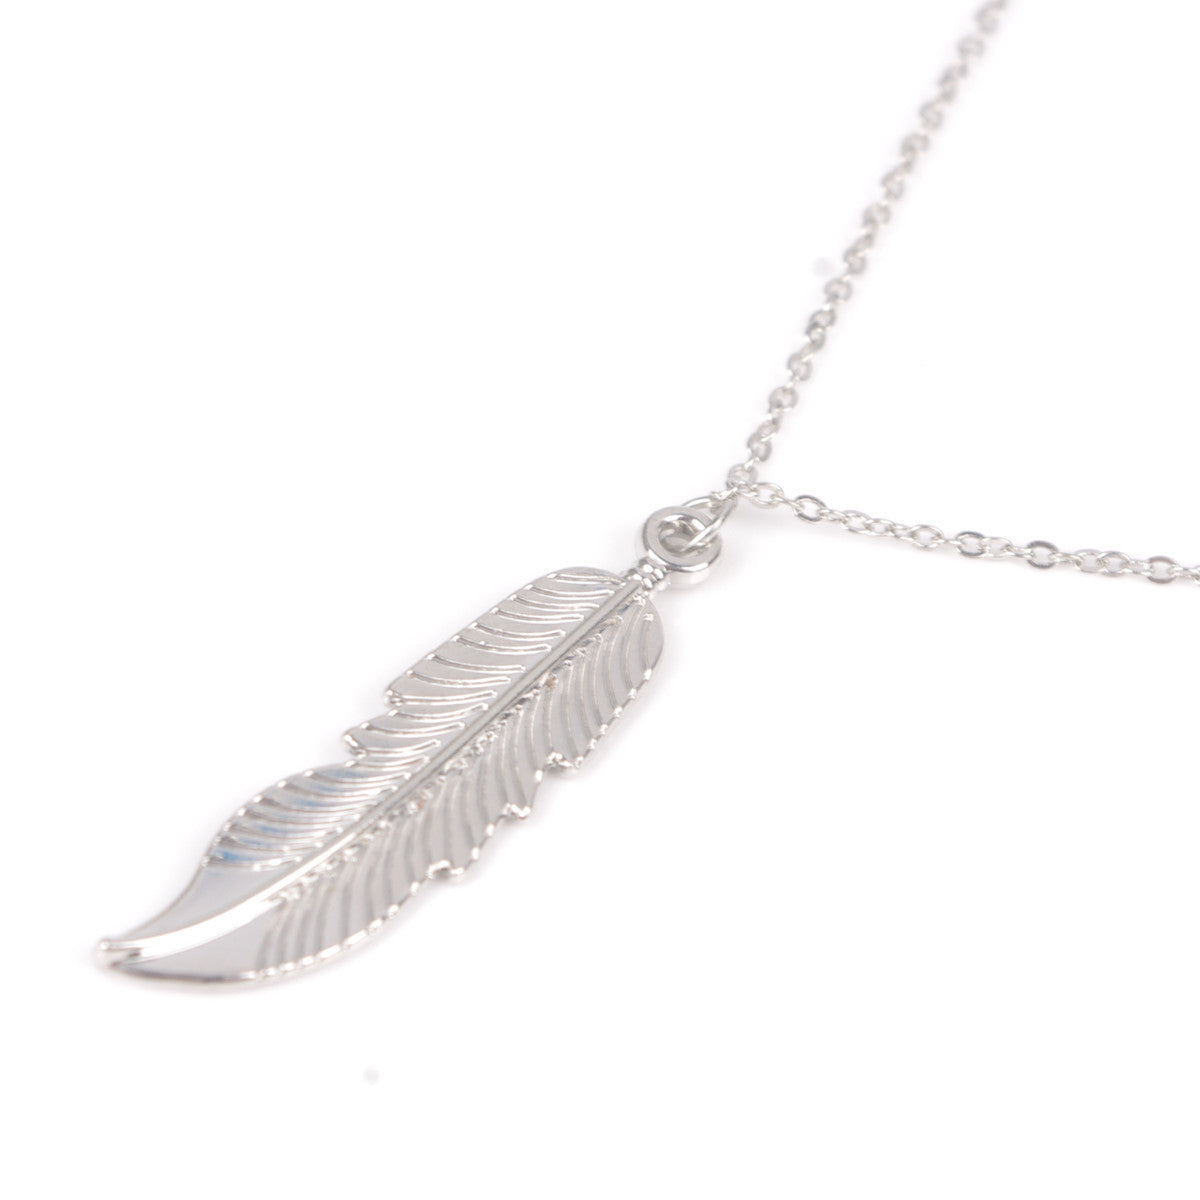 Metal Feather Tassels Sequins Multilayer Necklace - Oh Yours Fashion - 4